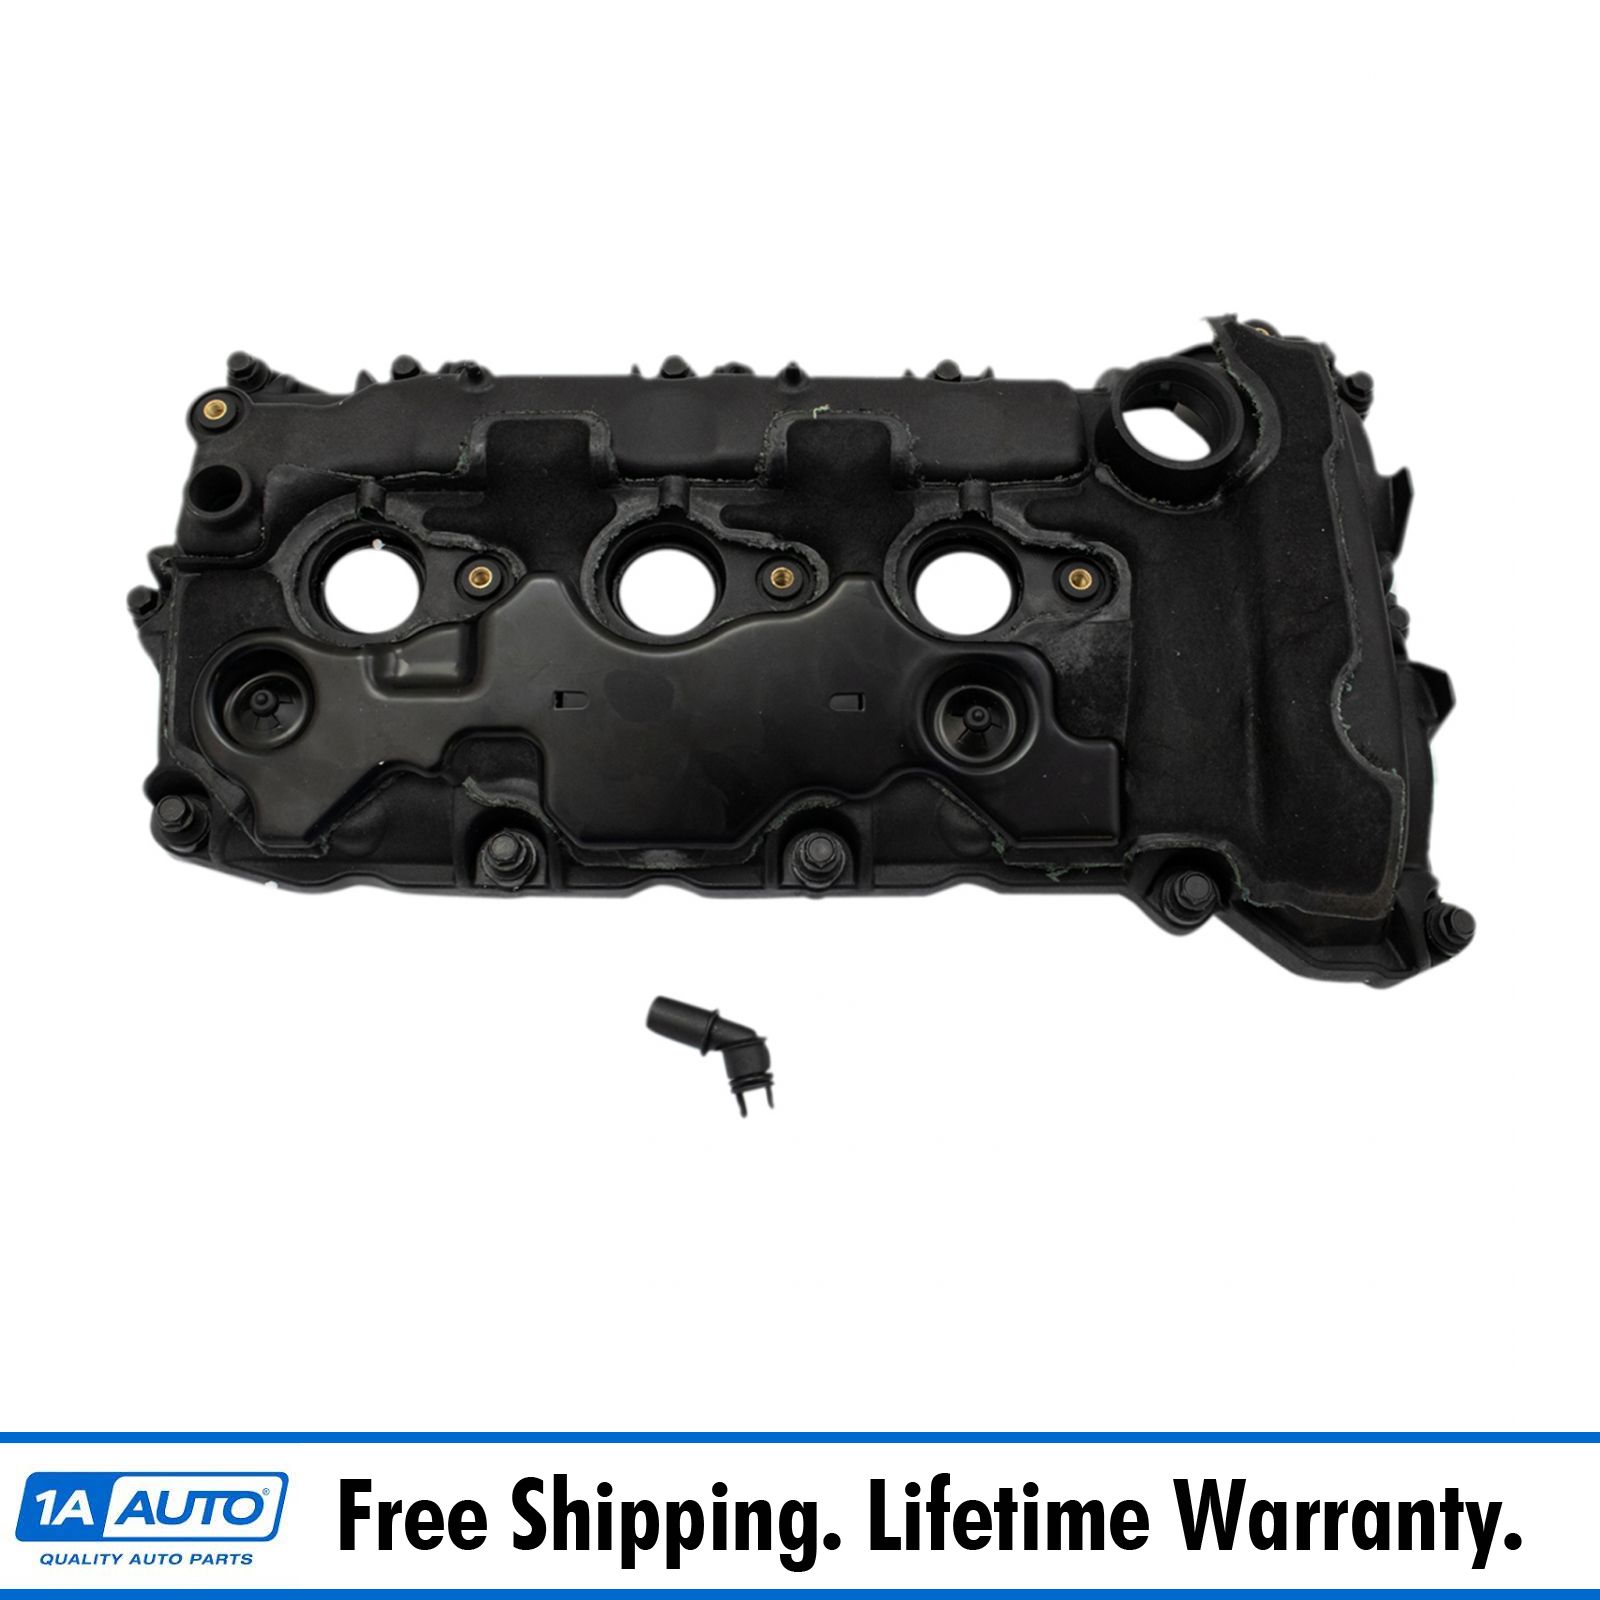 Valve Cover Assembly with Gasket for VW 3.6L Engine